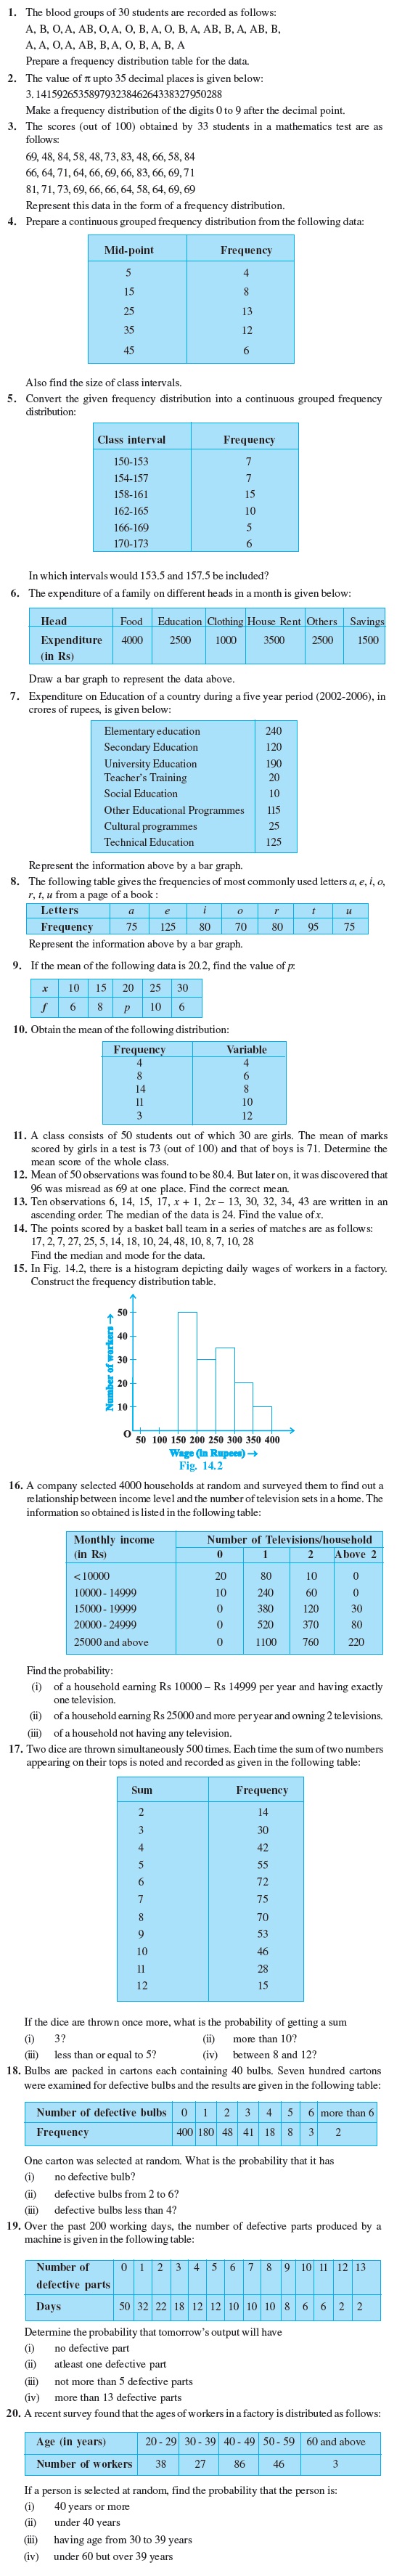 Class 9 Important Questions for Maths - Statistics and Probability/